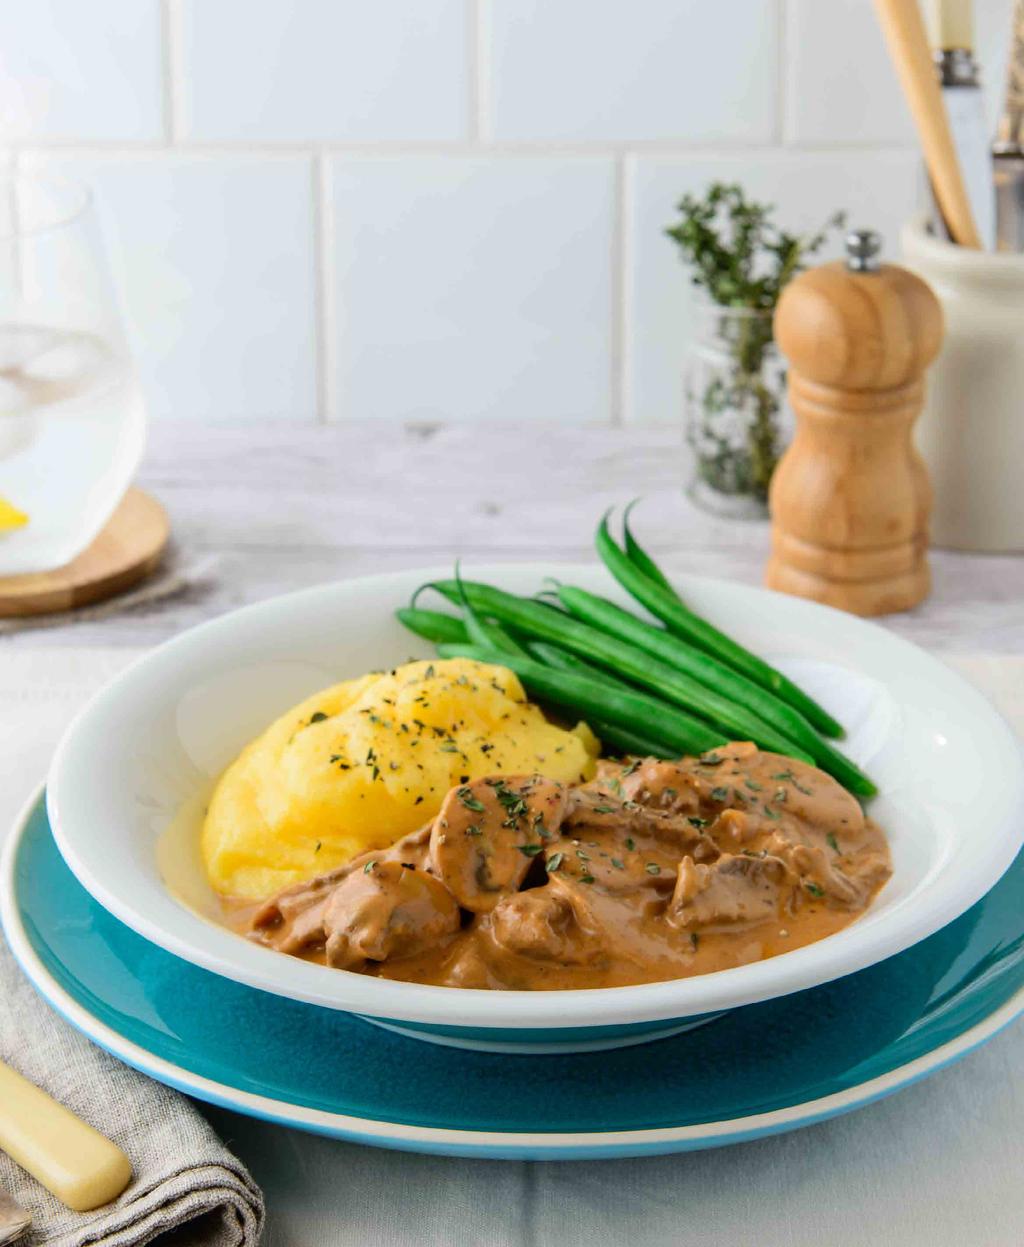 BEEF STROGANOFF SERVES 1 335 per serve 1/4 cup dry polenta 1 cup water Cooking oil spray 100g of lean beef rump 1/4 brown onion, sliced 1 cup mushrooms, sliced 1 & 1/2 tsp plain wholemeal flour 1/2